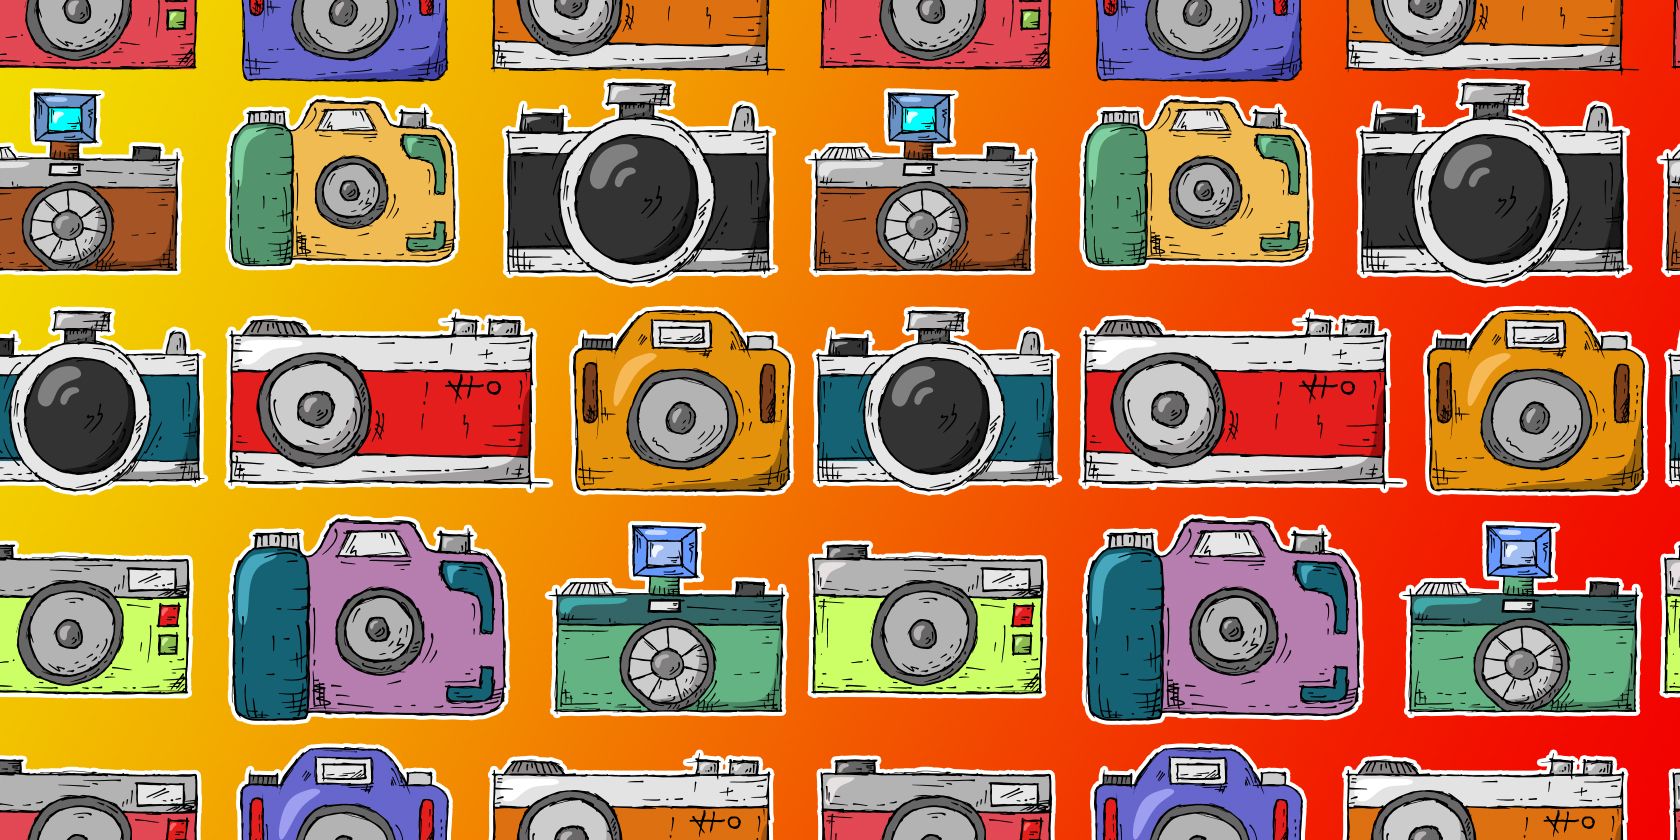 camera illustrations on a red and yellow gradient background